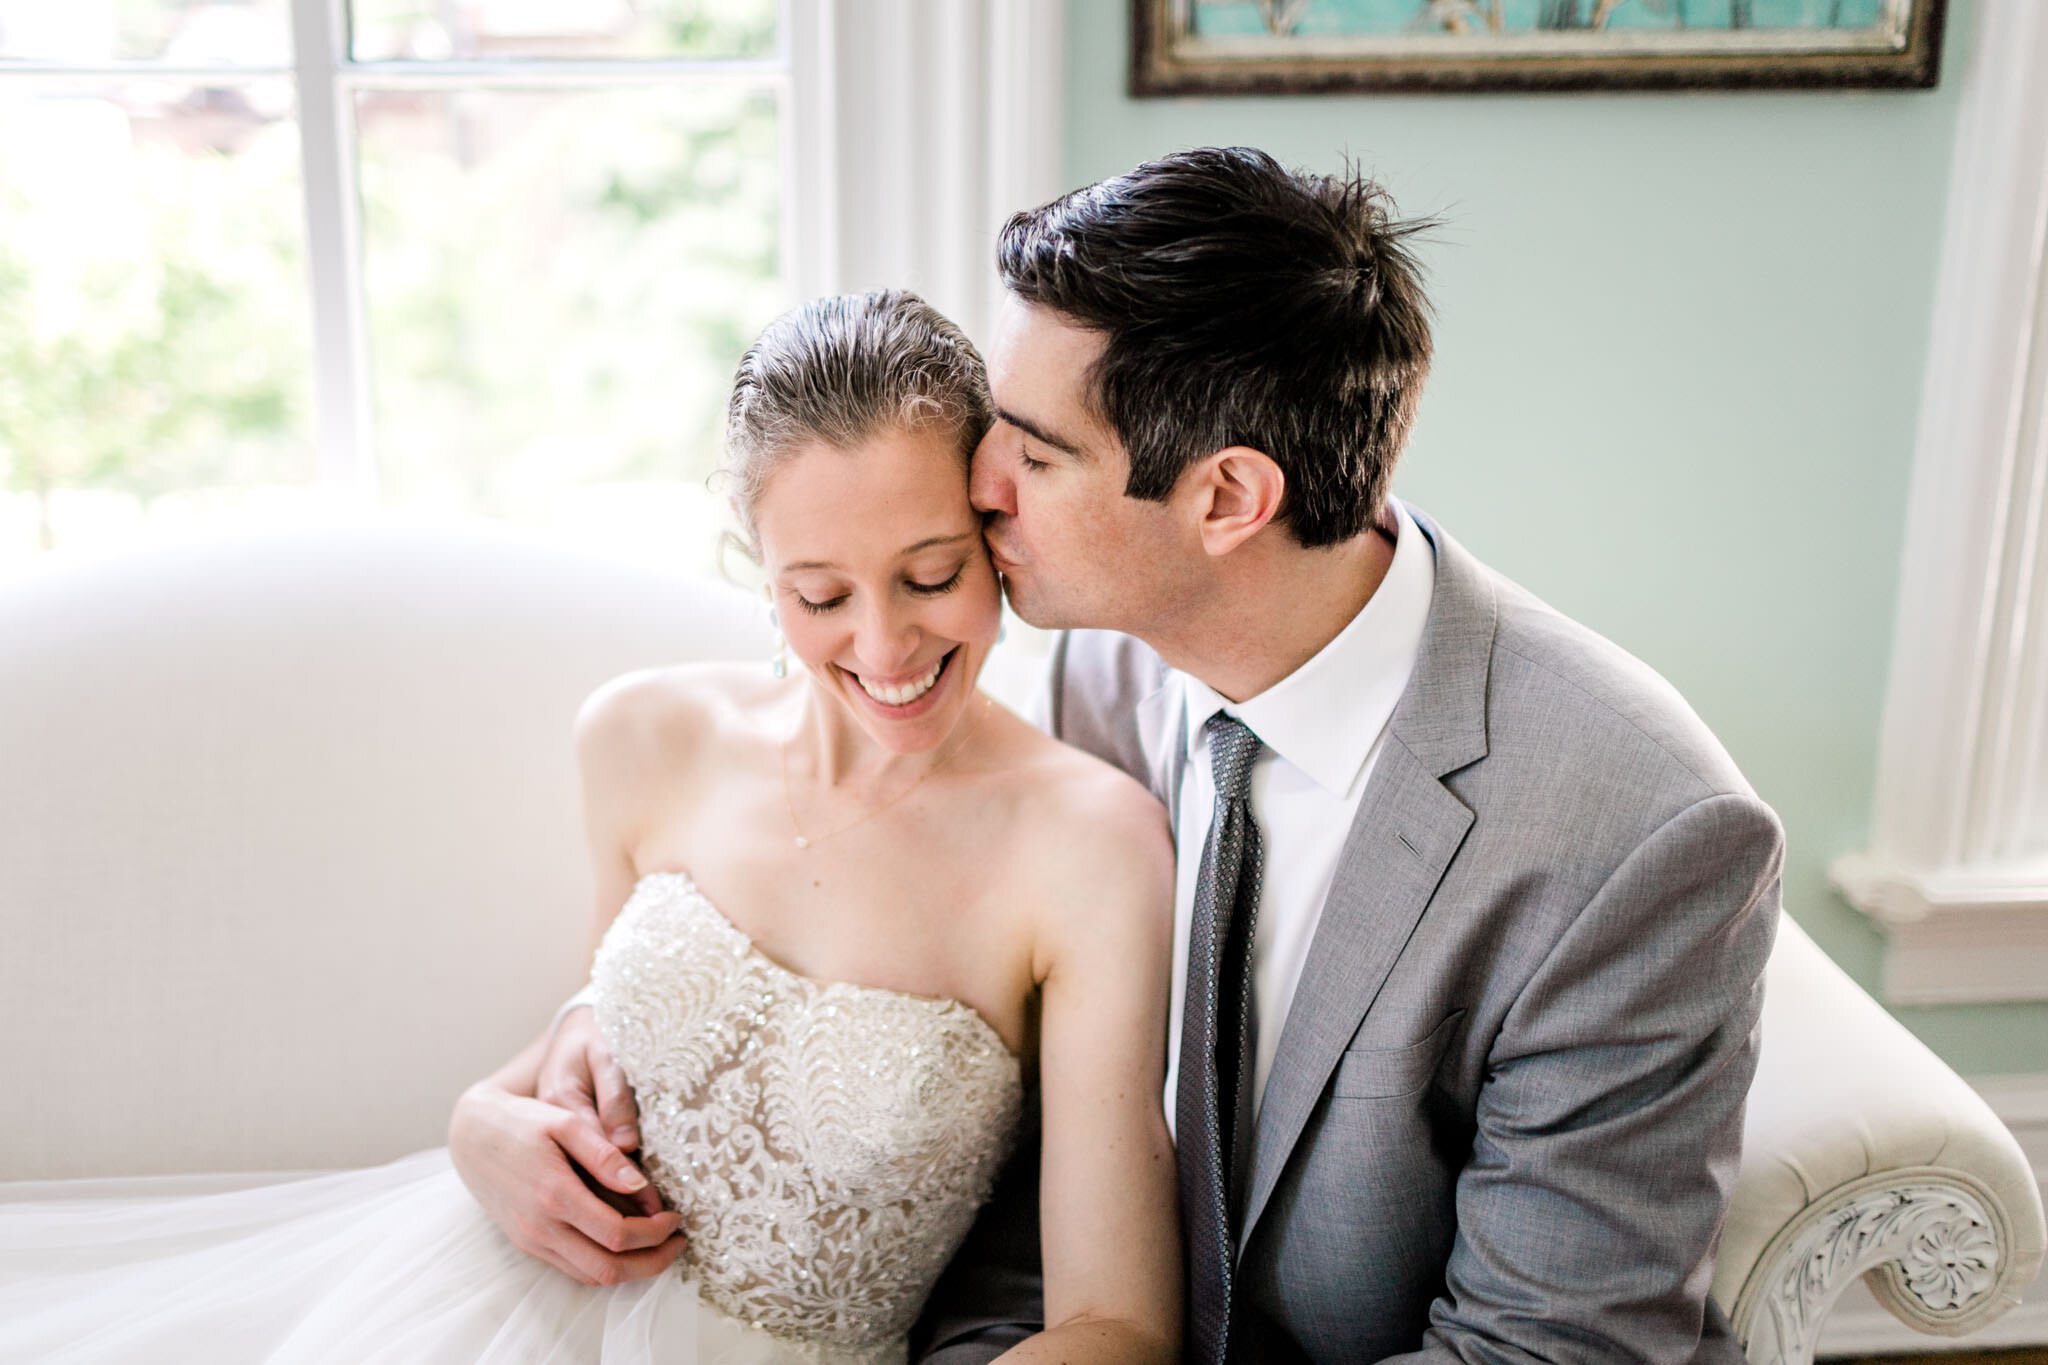 Raleigh Wedding Photographer | By G. Lin Photography | Merrimon Wynne House | Candid portrait of Bride and Groom on couch